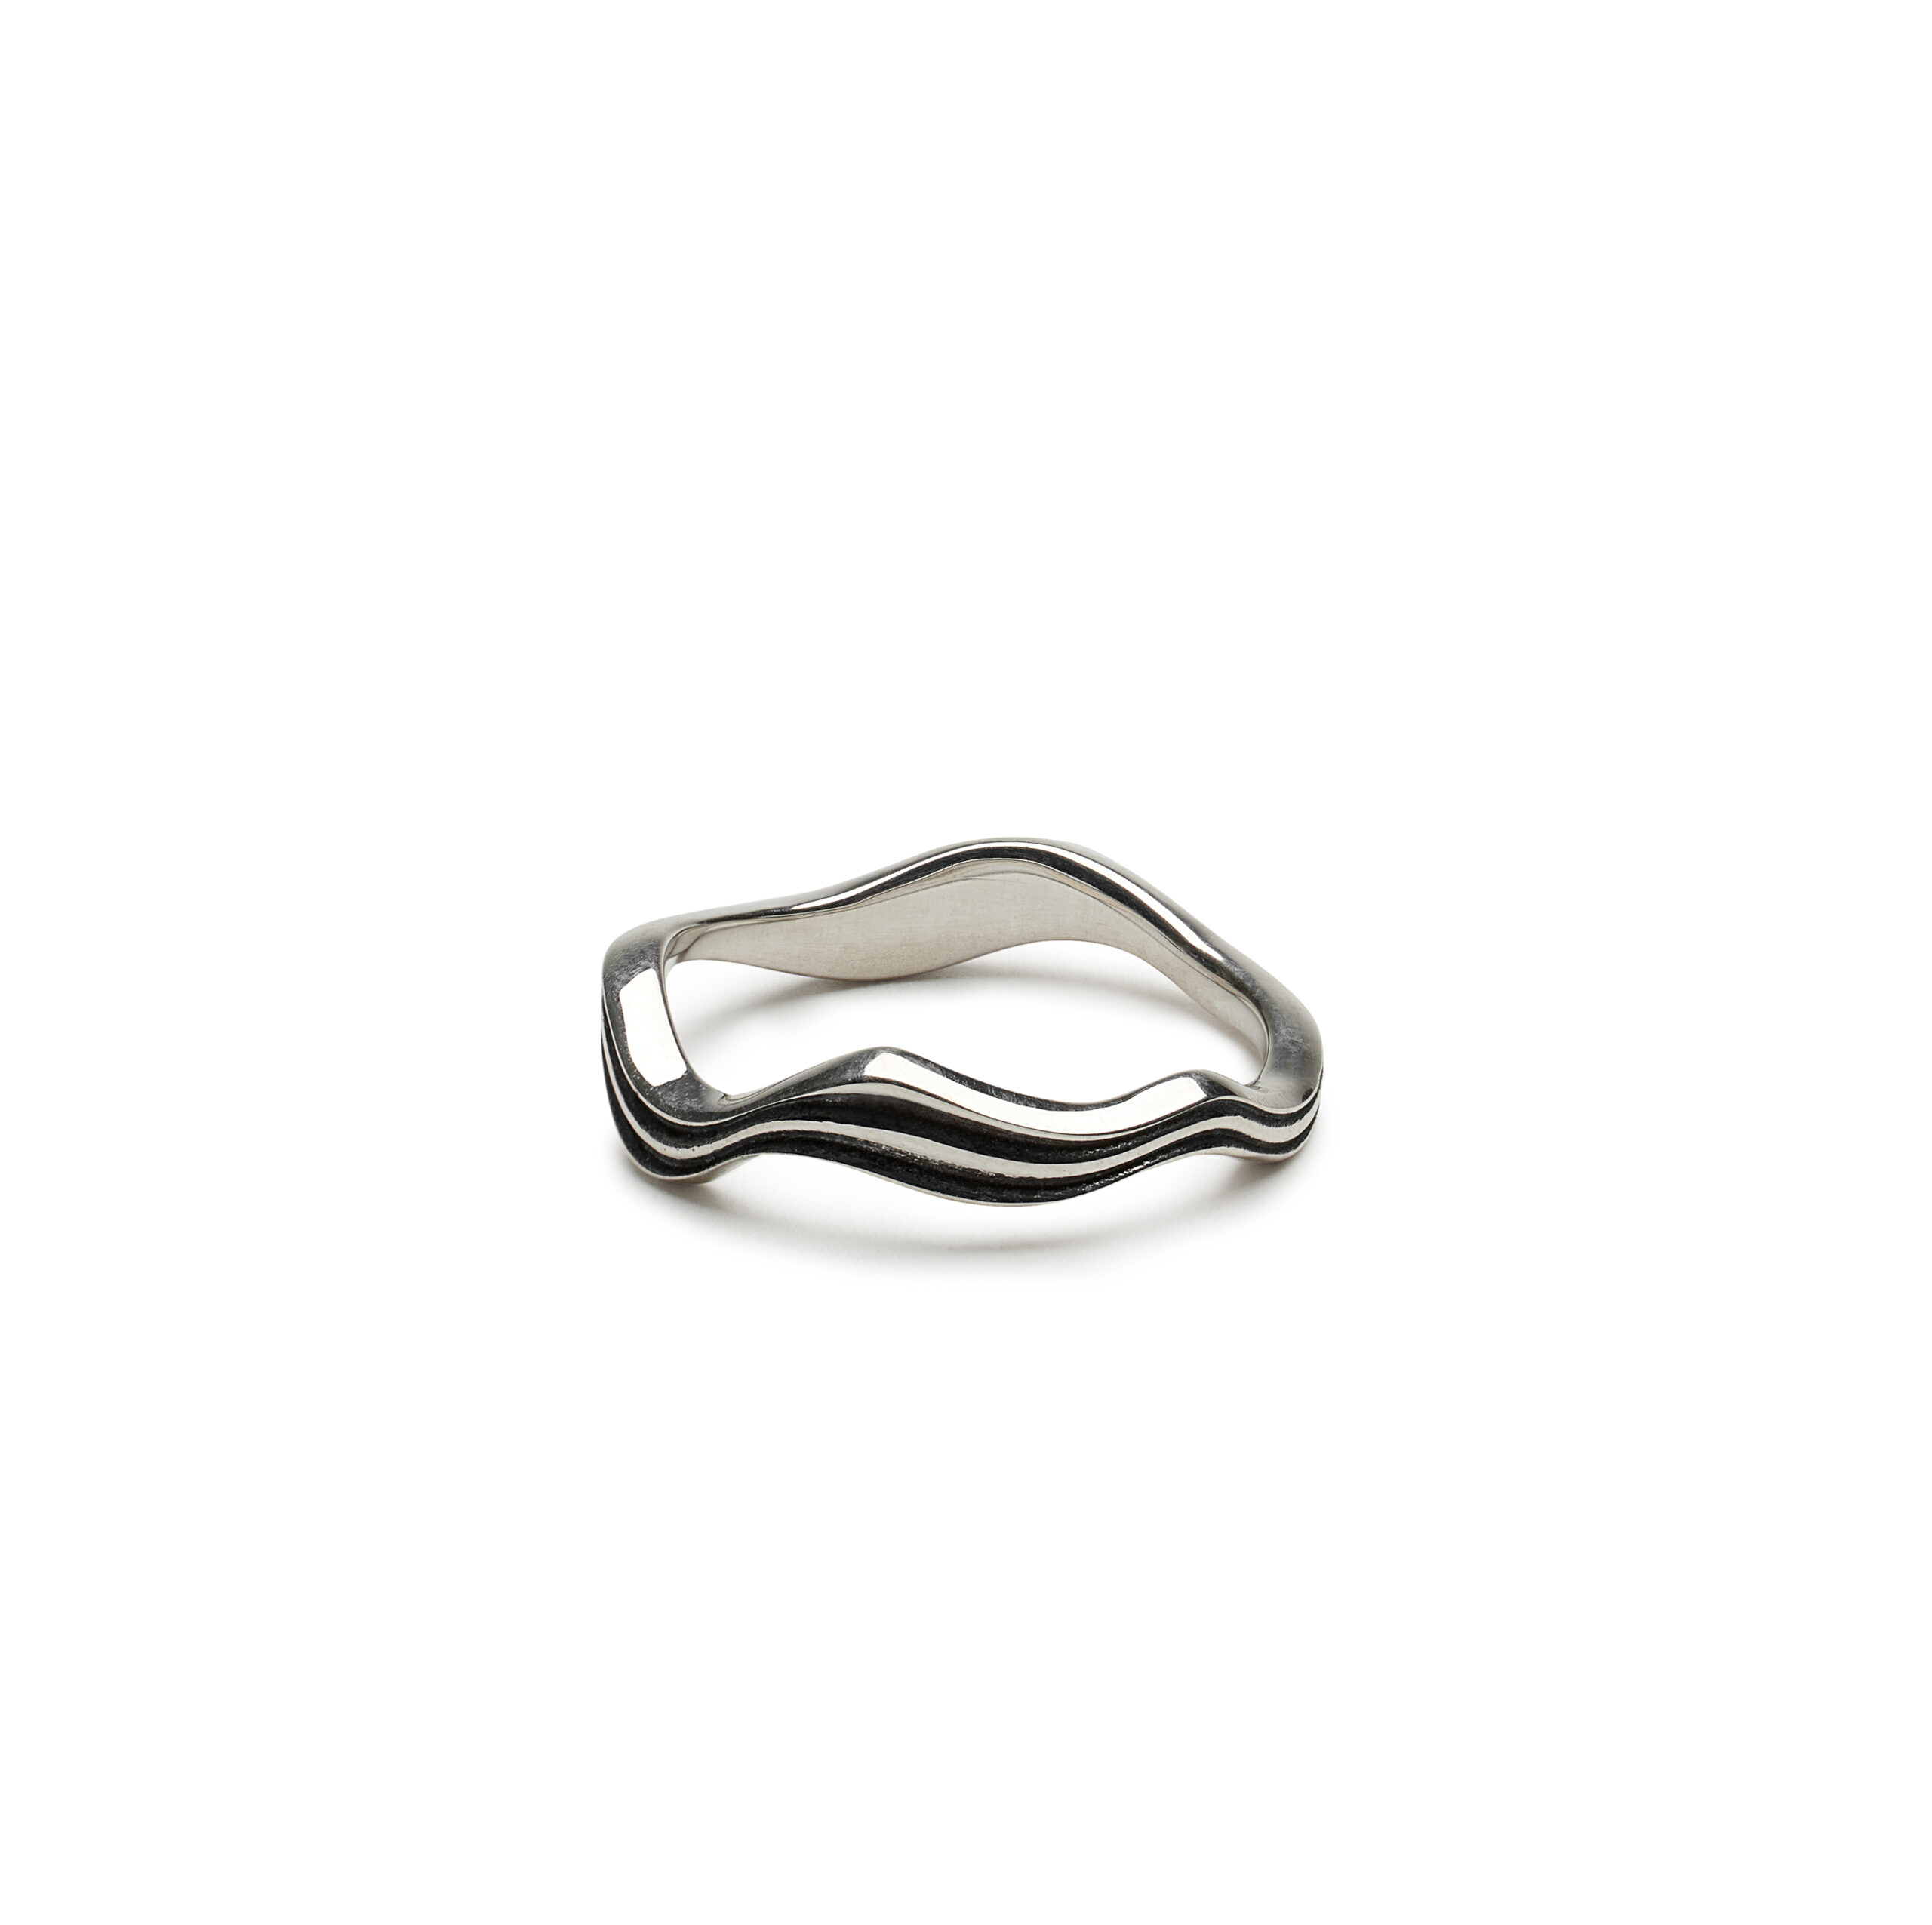 Silver river current ring modeled after flowing water